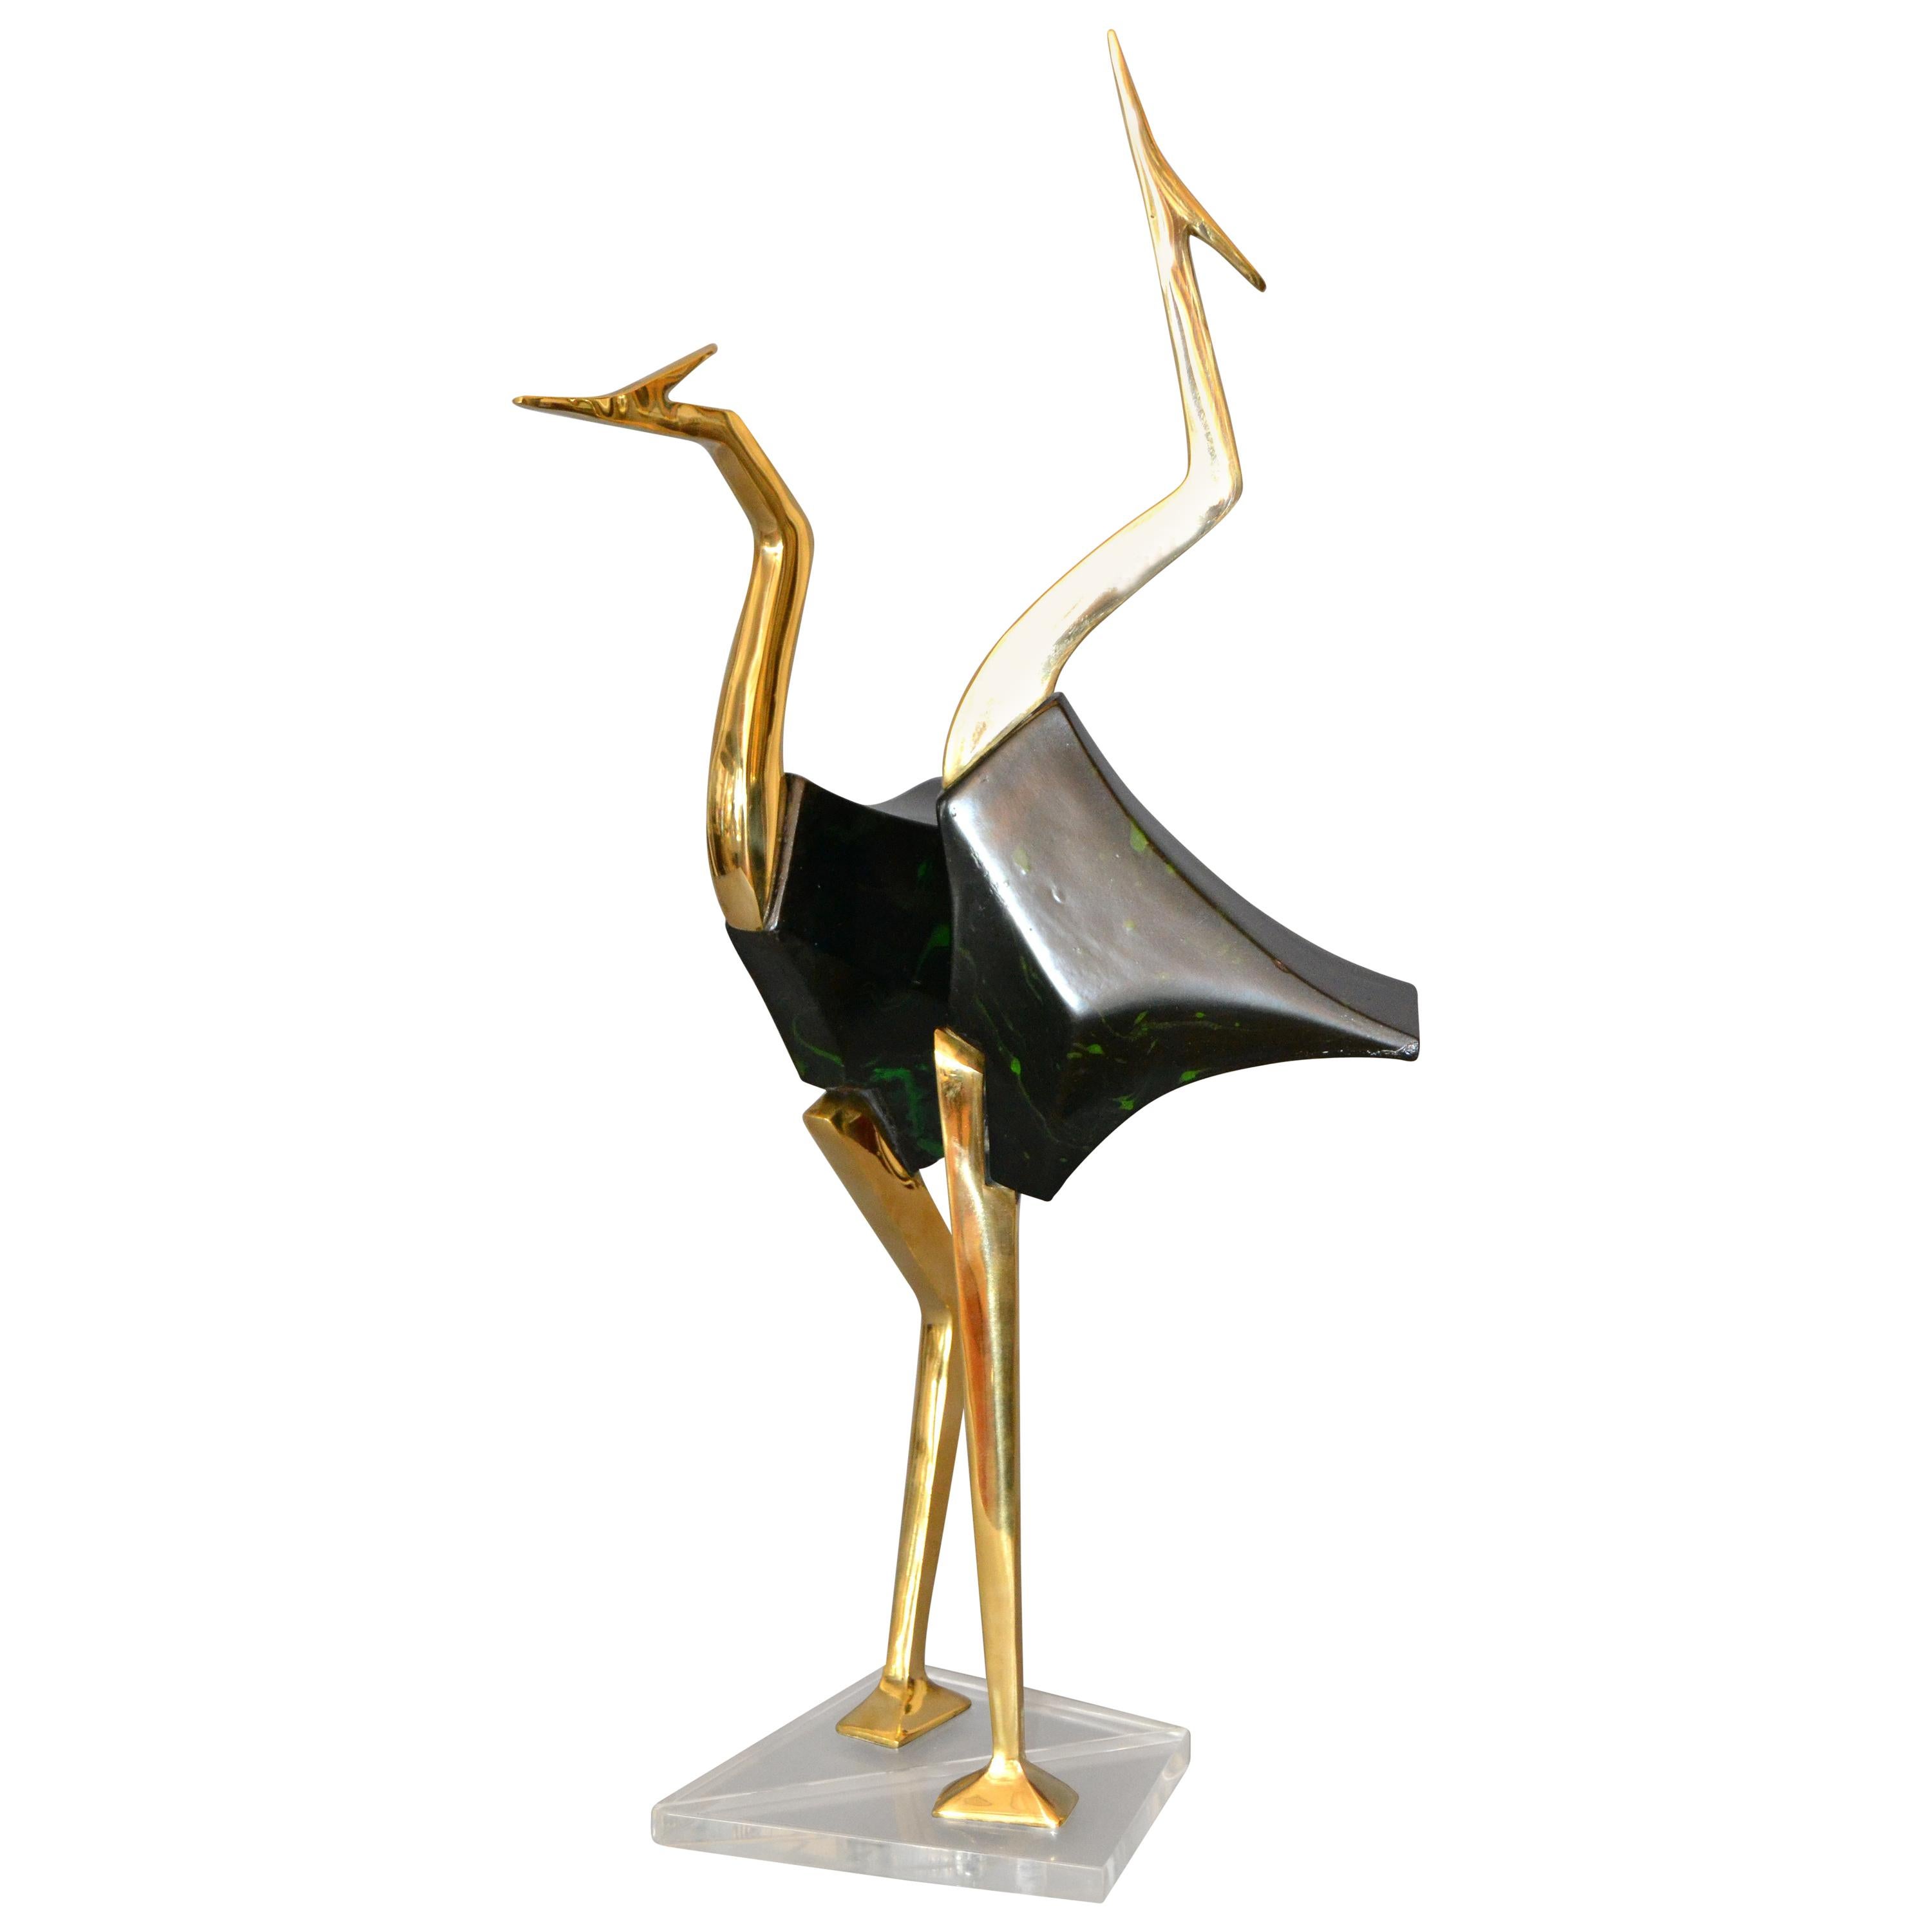 Stylized Brass and Wood Crane Sculptures on Lucite Base, a Pair